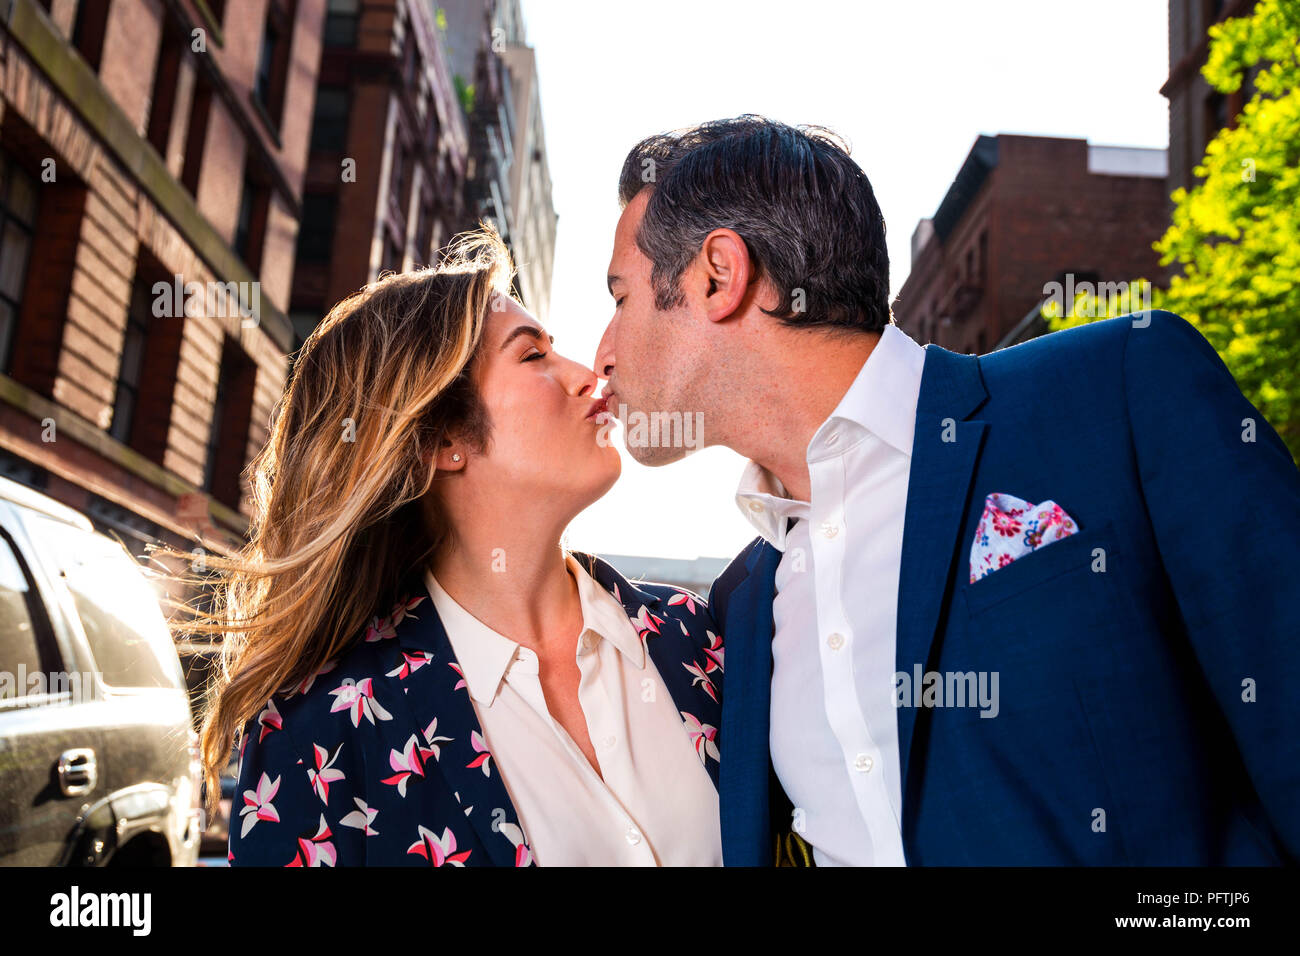 Caucasian New York City Man and Woman Couple Act Silly and Lovingly On The Streets Of Manhattan Stock Photo